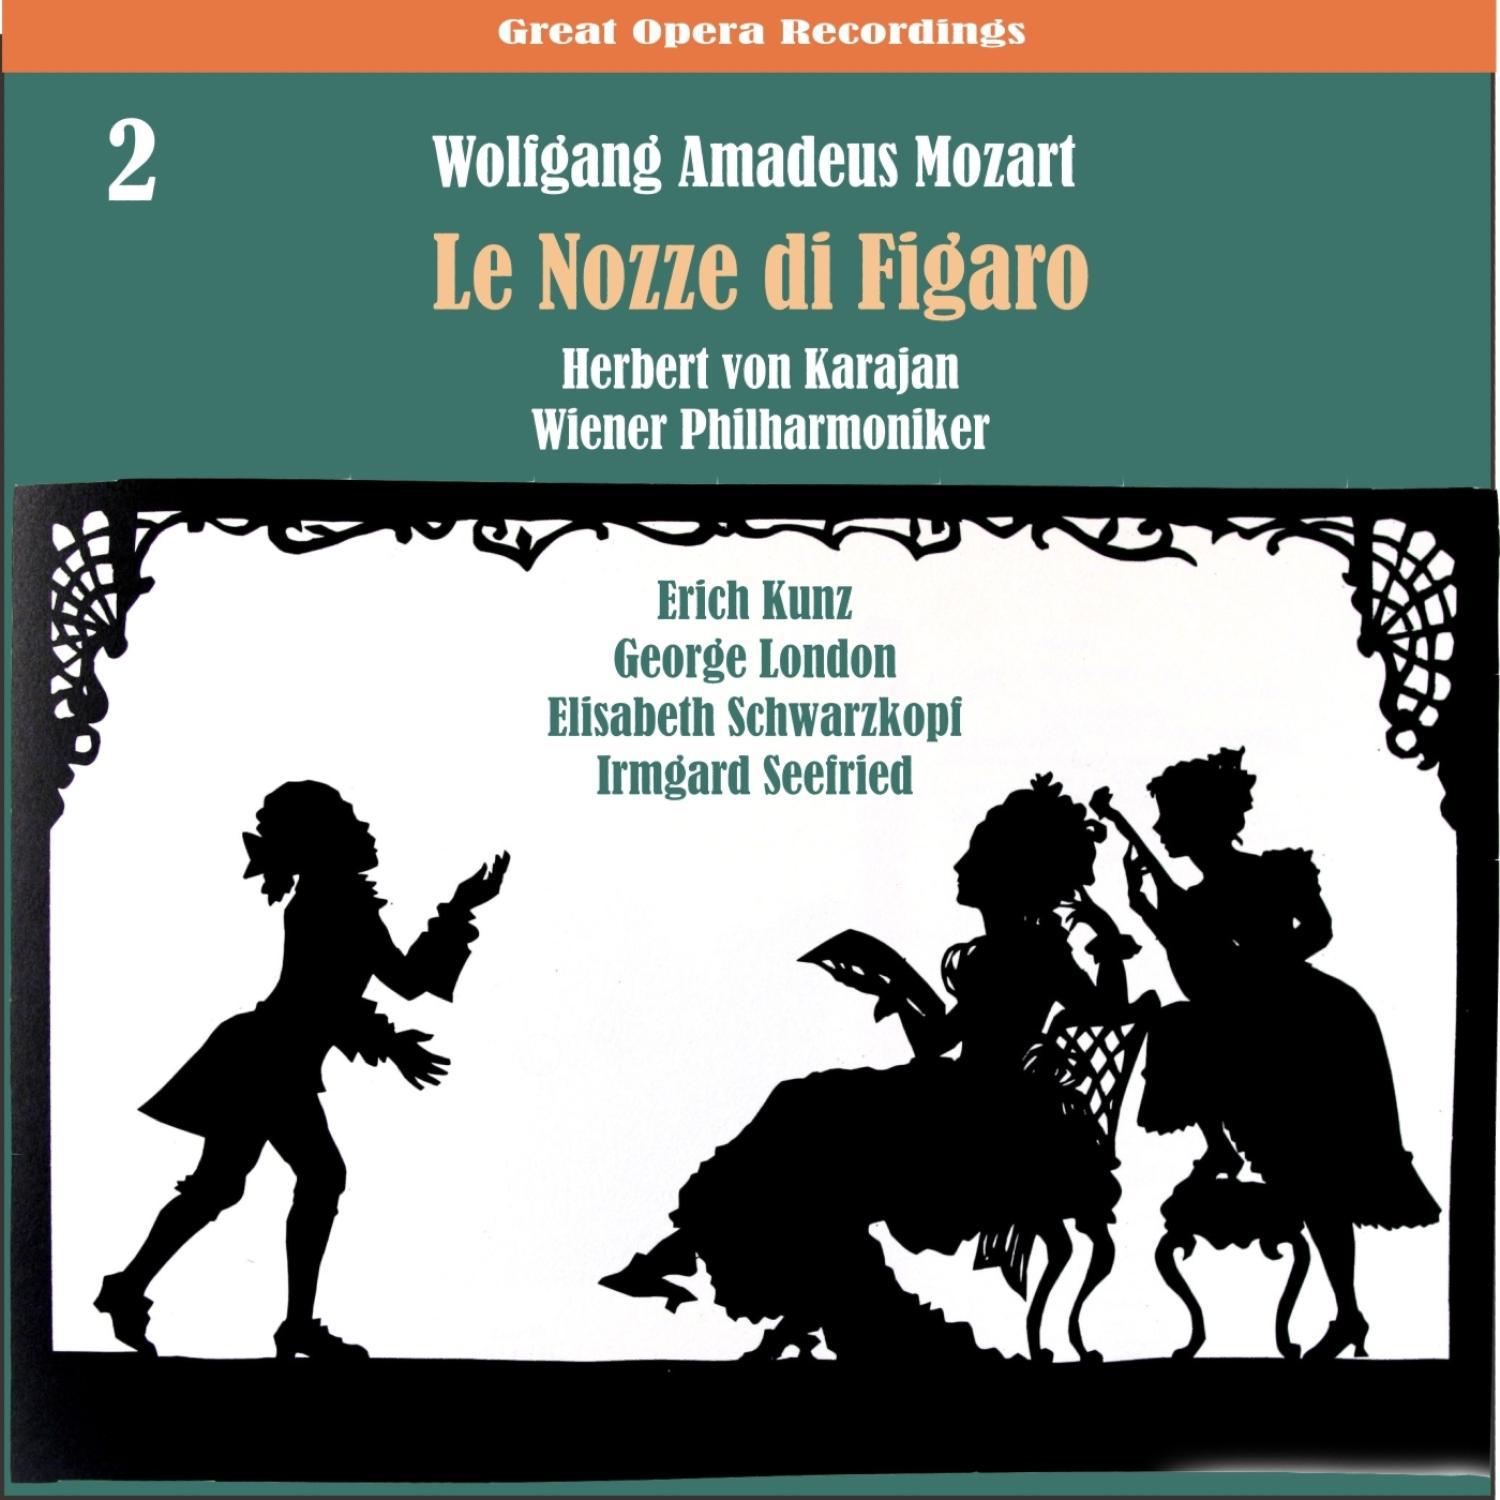 The Marriage of Figaro: Act 3, "Ricevete, o padroncina"